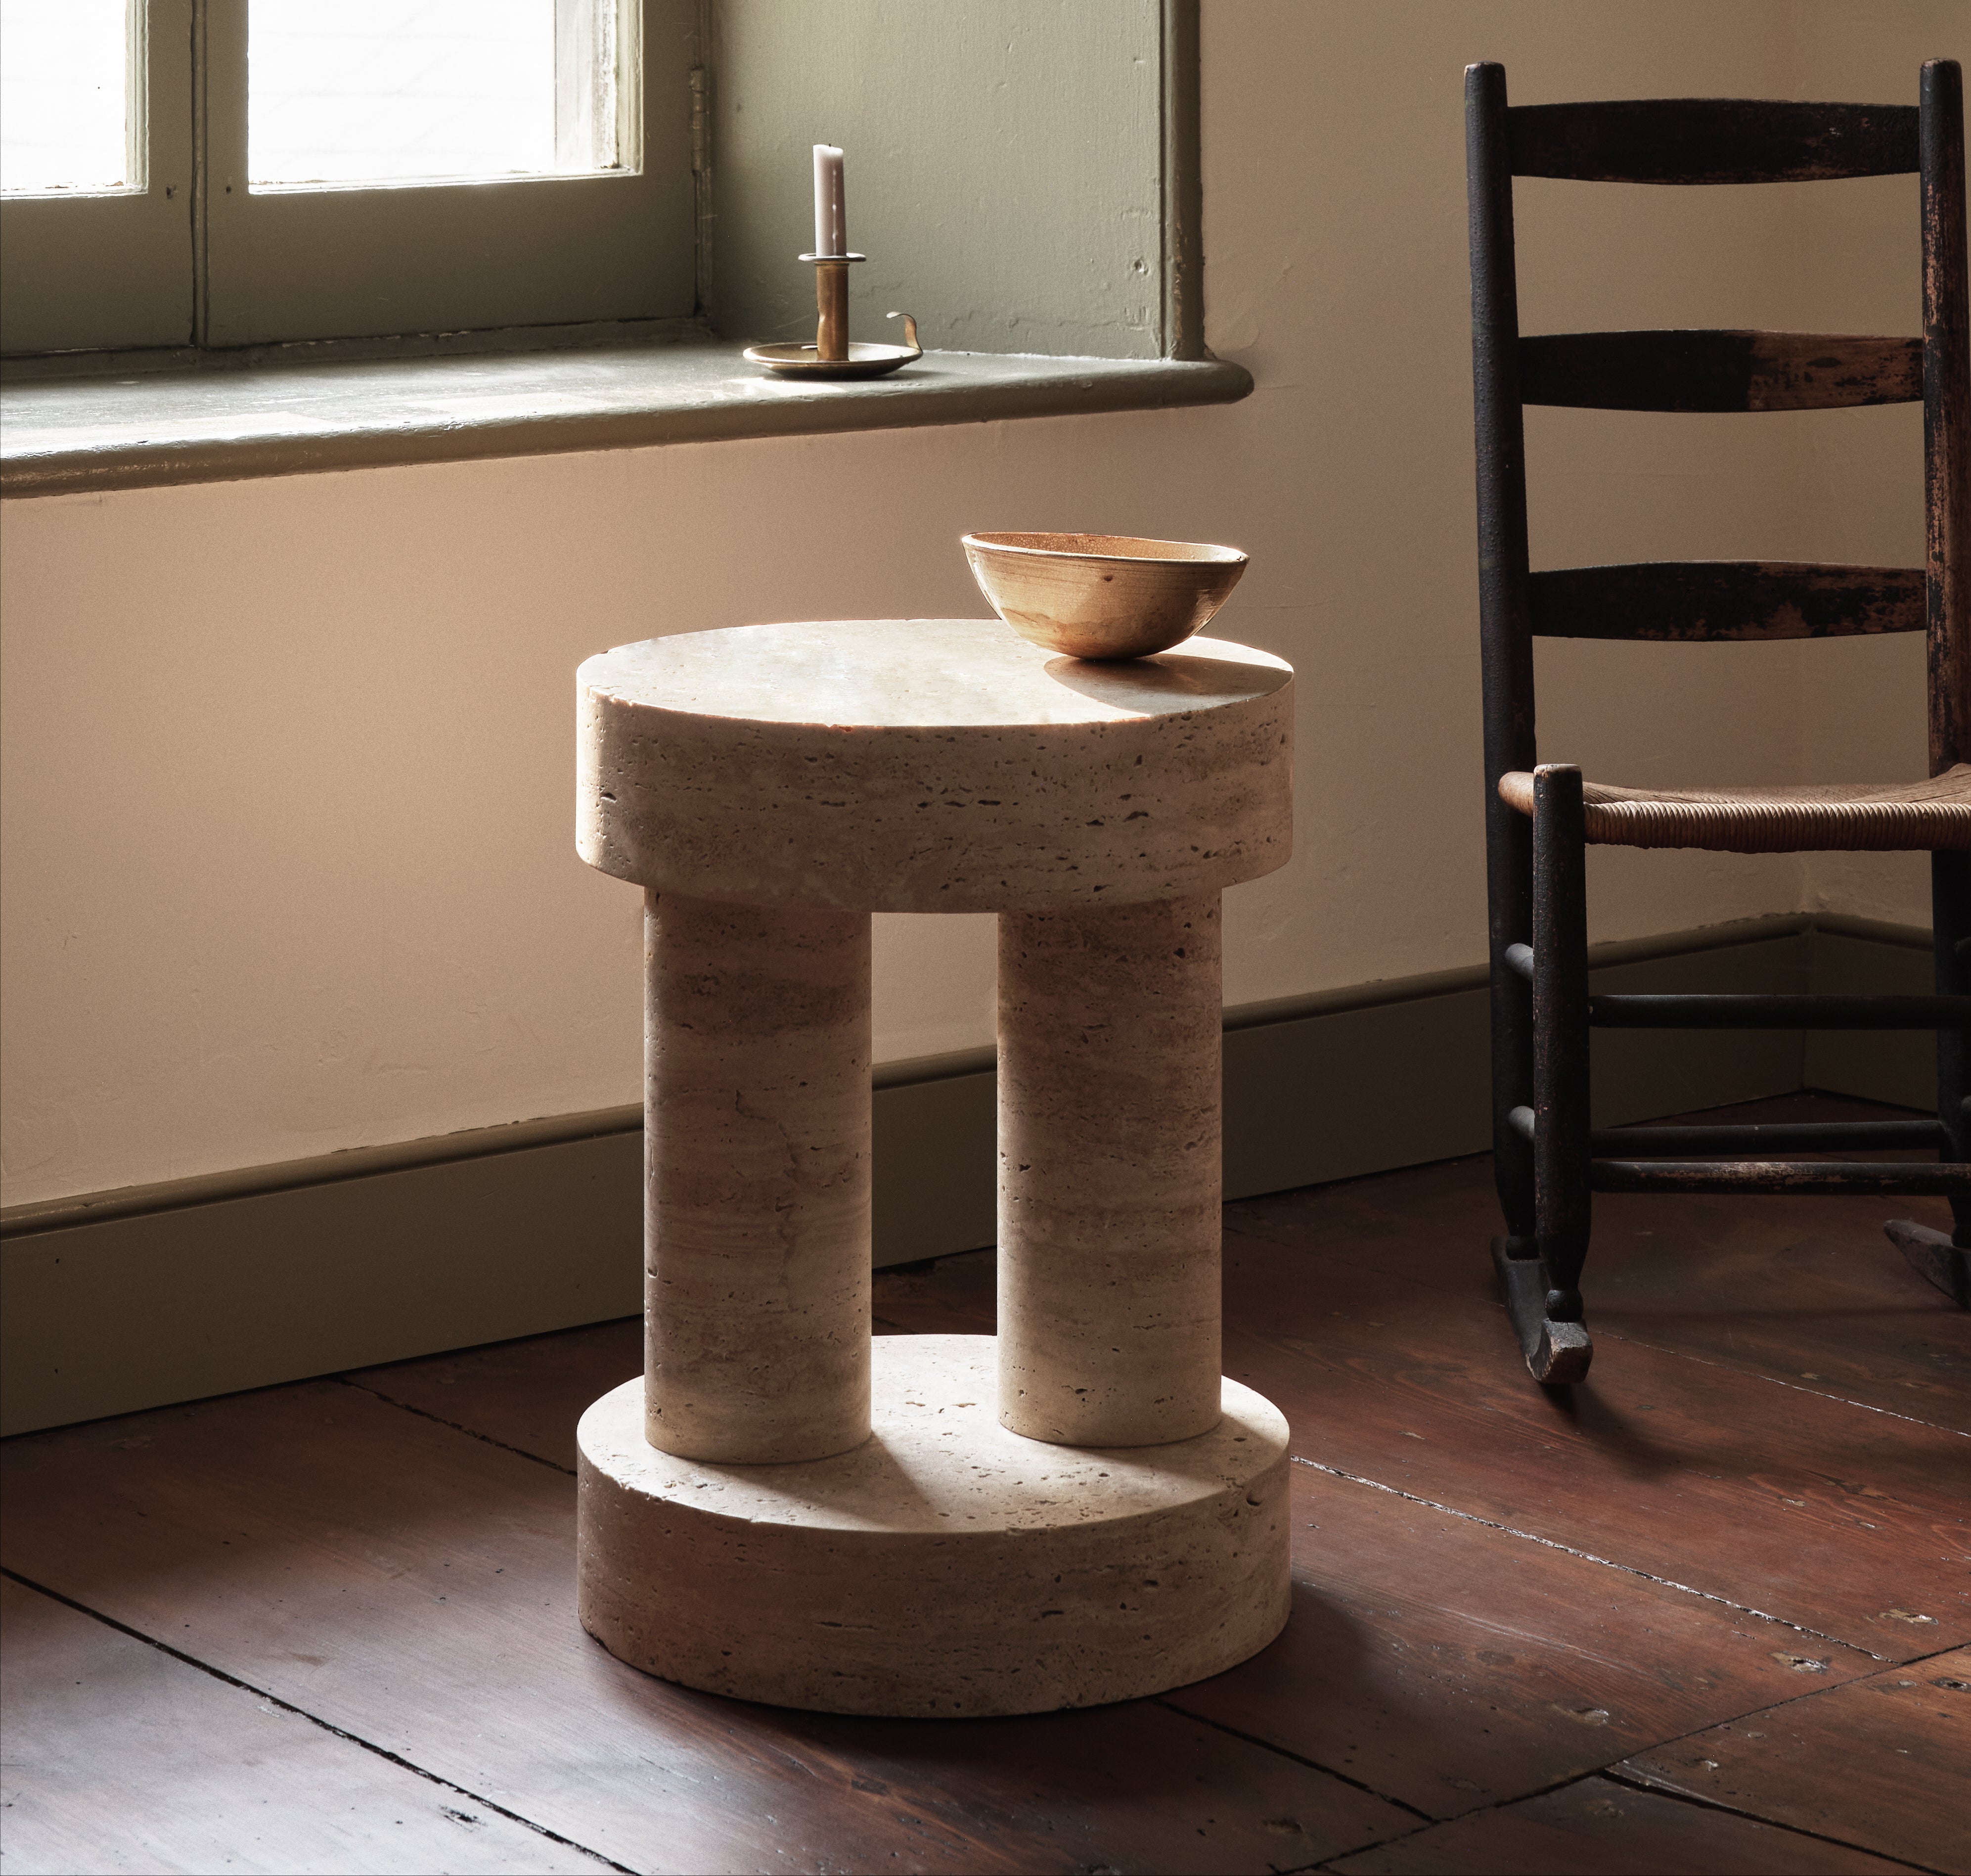 Carved from travertine or wood, these tables take their cue from carved Igbo Stools. There are four variations in the series.

Given the nature of the material, there are various shades and coloring that exist within any given block of travertine.